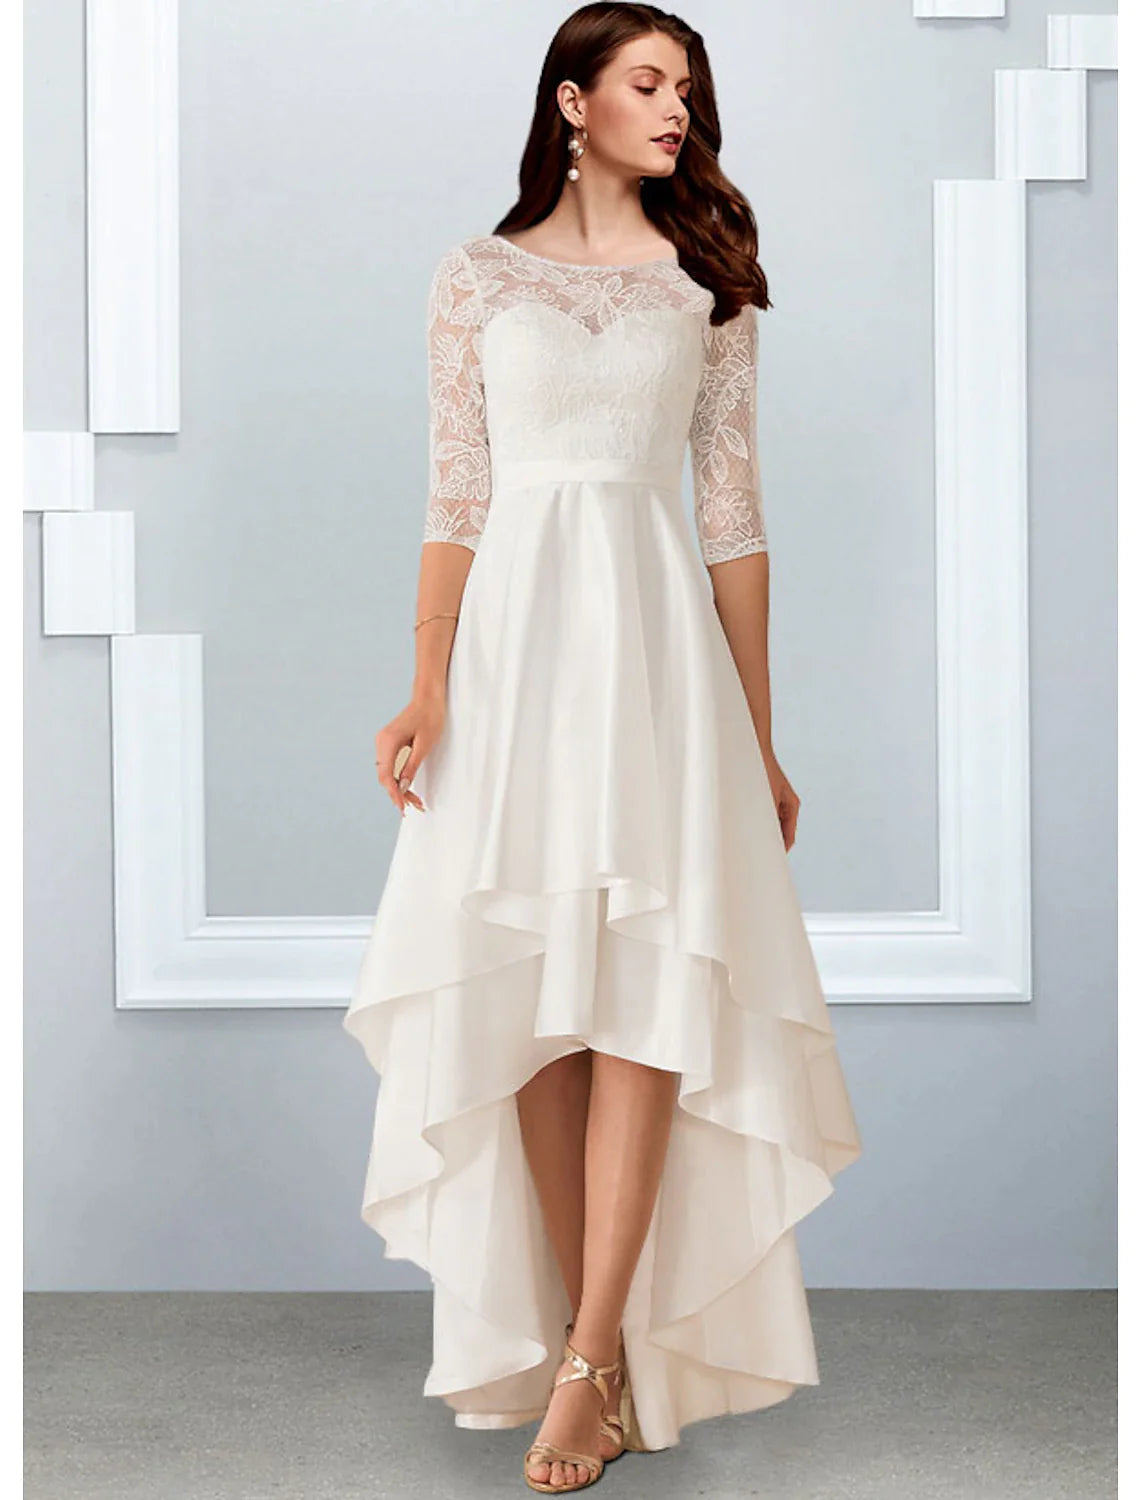 Reception Little White Dresses Wedding Dresses A-Line Illusion Neck Half Sleeve Asymmetrical Chiffon Bridal Gowns With Cascading Ruffles